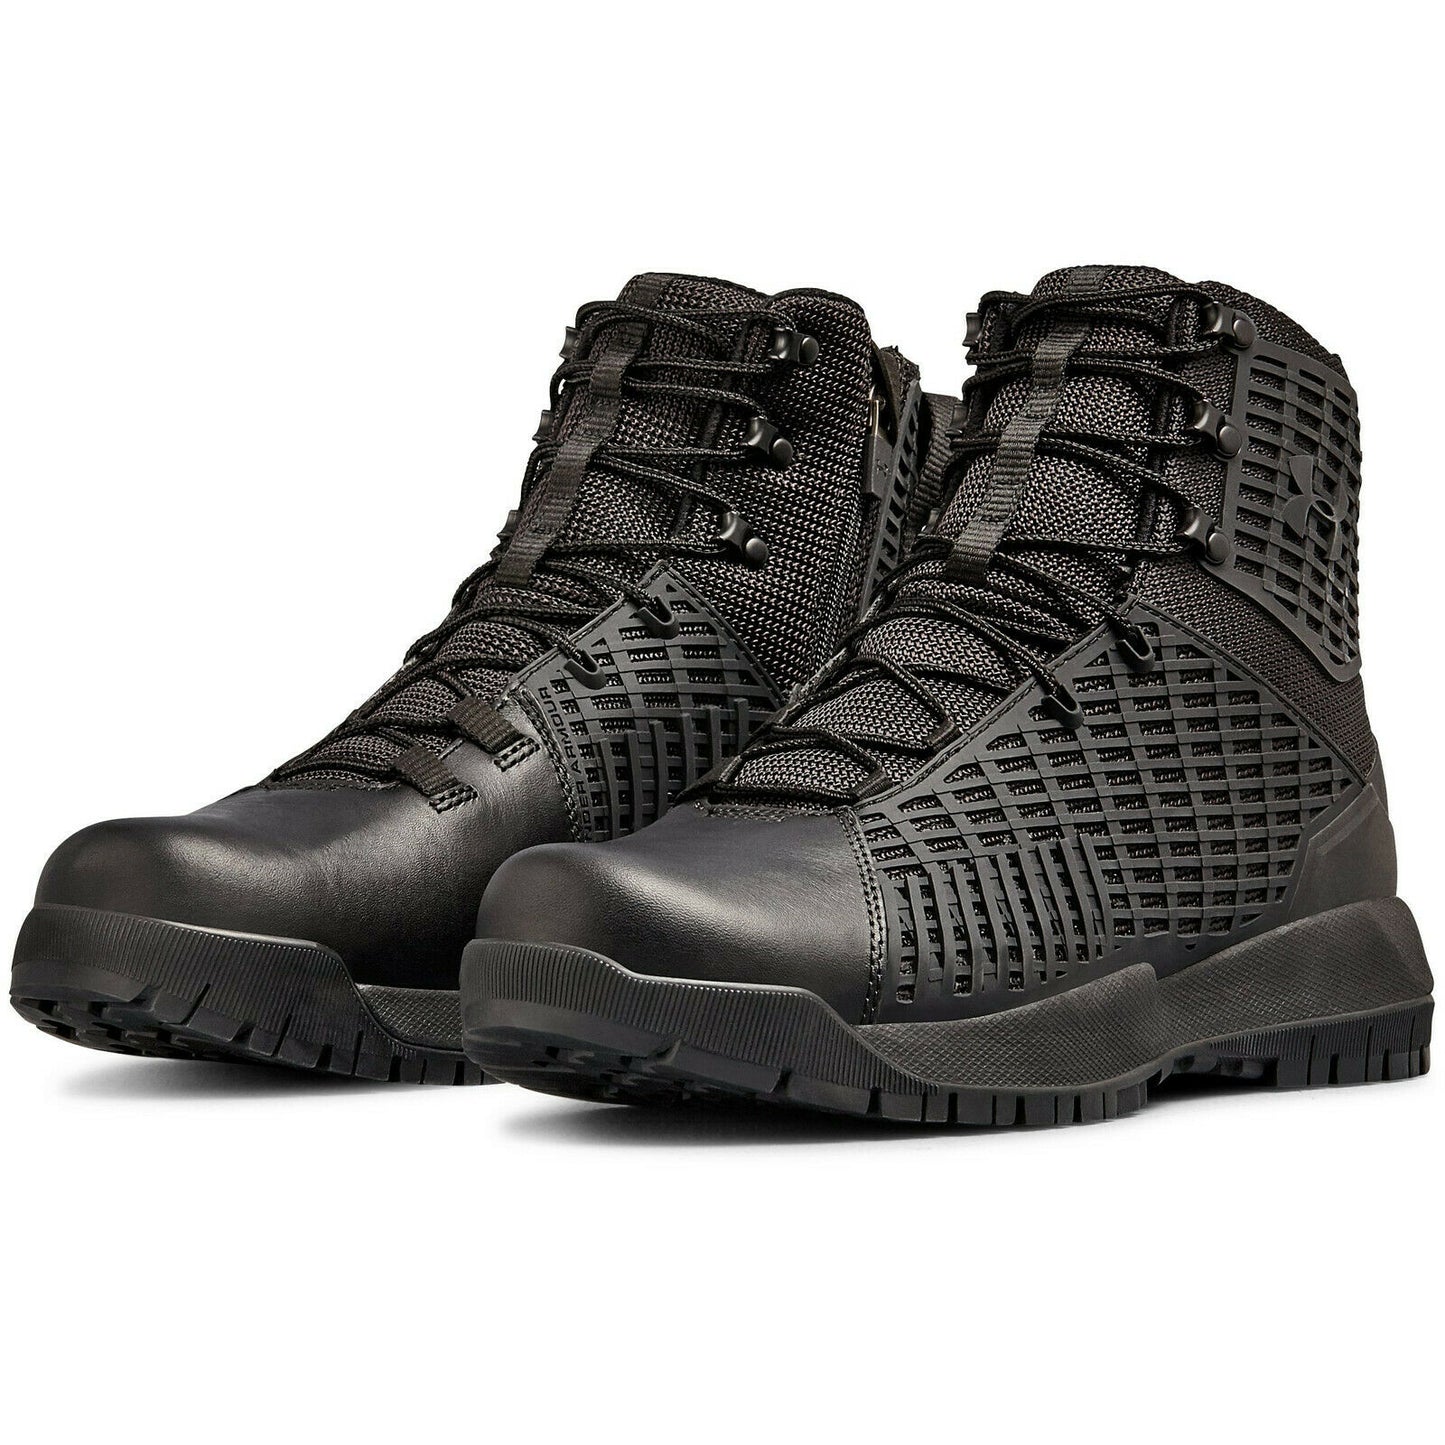 UA Stryker Side-Zip Boot - Under Armour Men’s Tactical Boots in Black